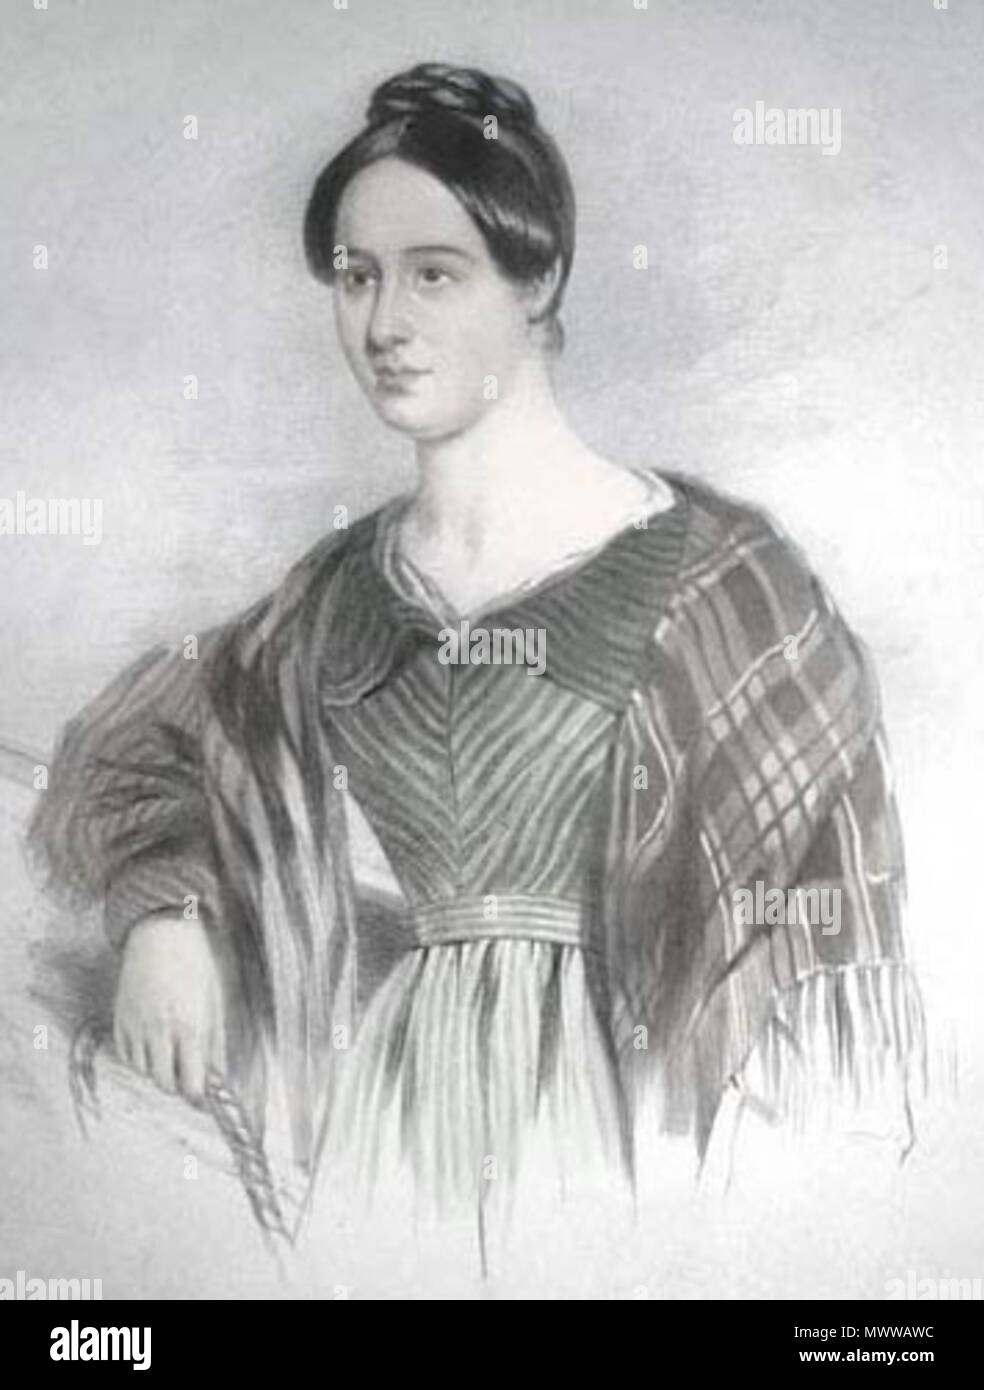 . English: Grace Horsely Darling famed for her part in the rescue of passengers from the wrecked steam packet, Forfarshire at the Farne Islands, Northumberland, England early in the morning of 7th September 1838. Portrait circa 1839. Image recovered from a mid-19th Century print. 3 October 2009. Restoredprints 252 Grace Horsley Darling - Portrait Stock Photo